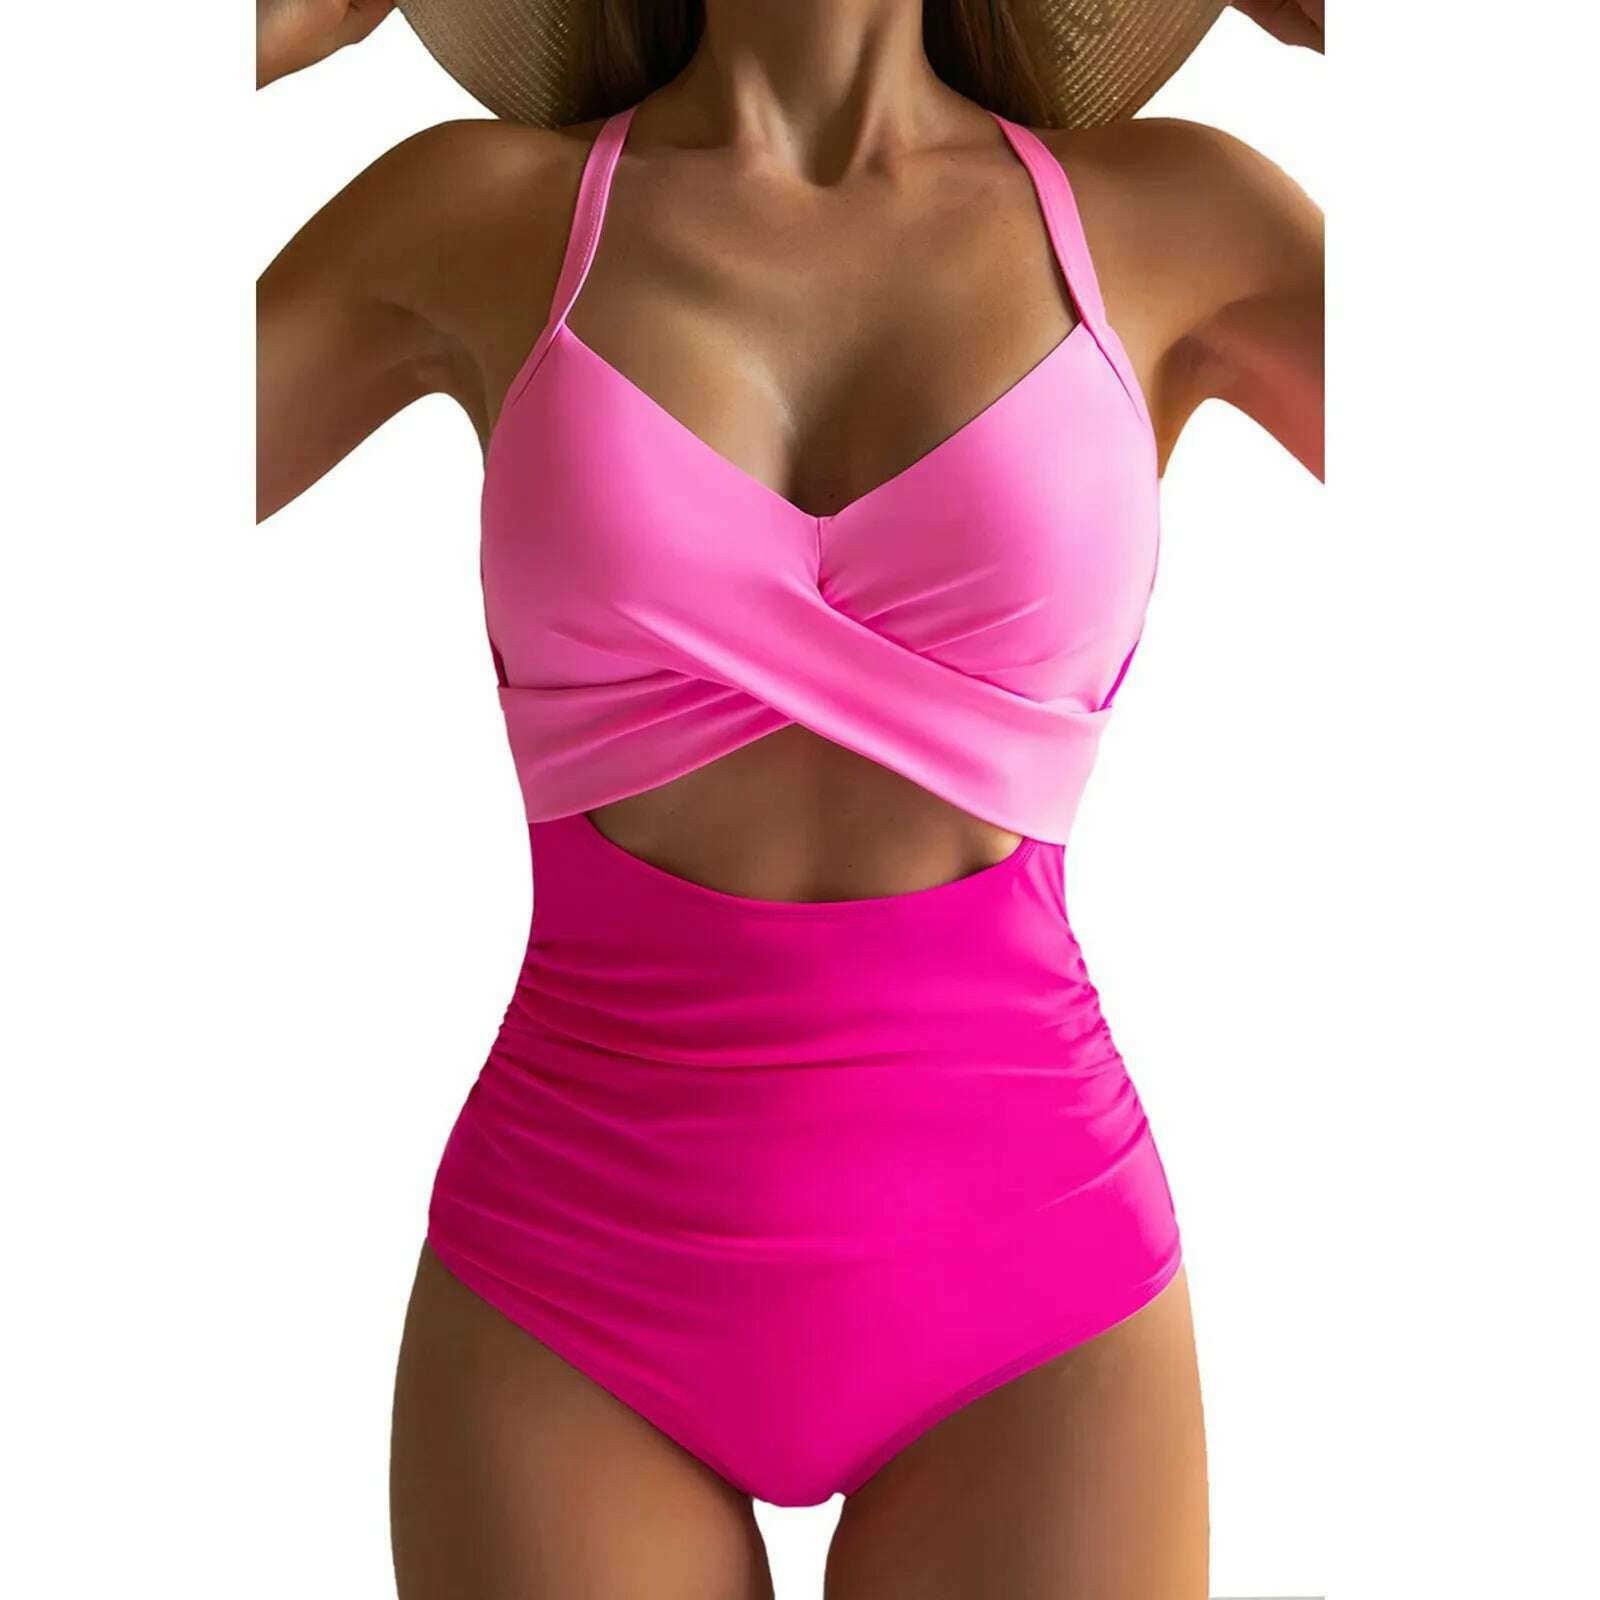 KIMLUD, Women's Colorful Sexy Hollow Cross Halter Bikini Beach Swimsuit (With Chest Pad Without Steel Bra), Hot Pink / S, KIMLUD Women's Clothes